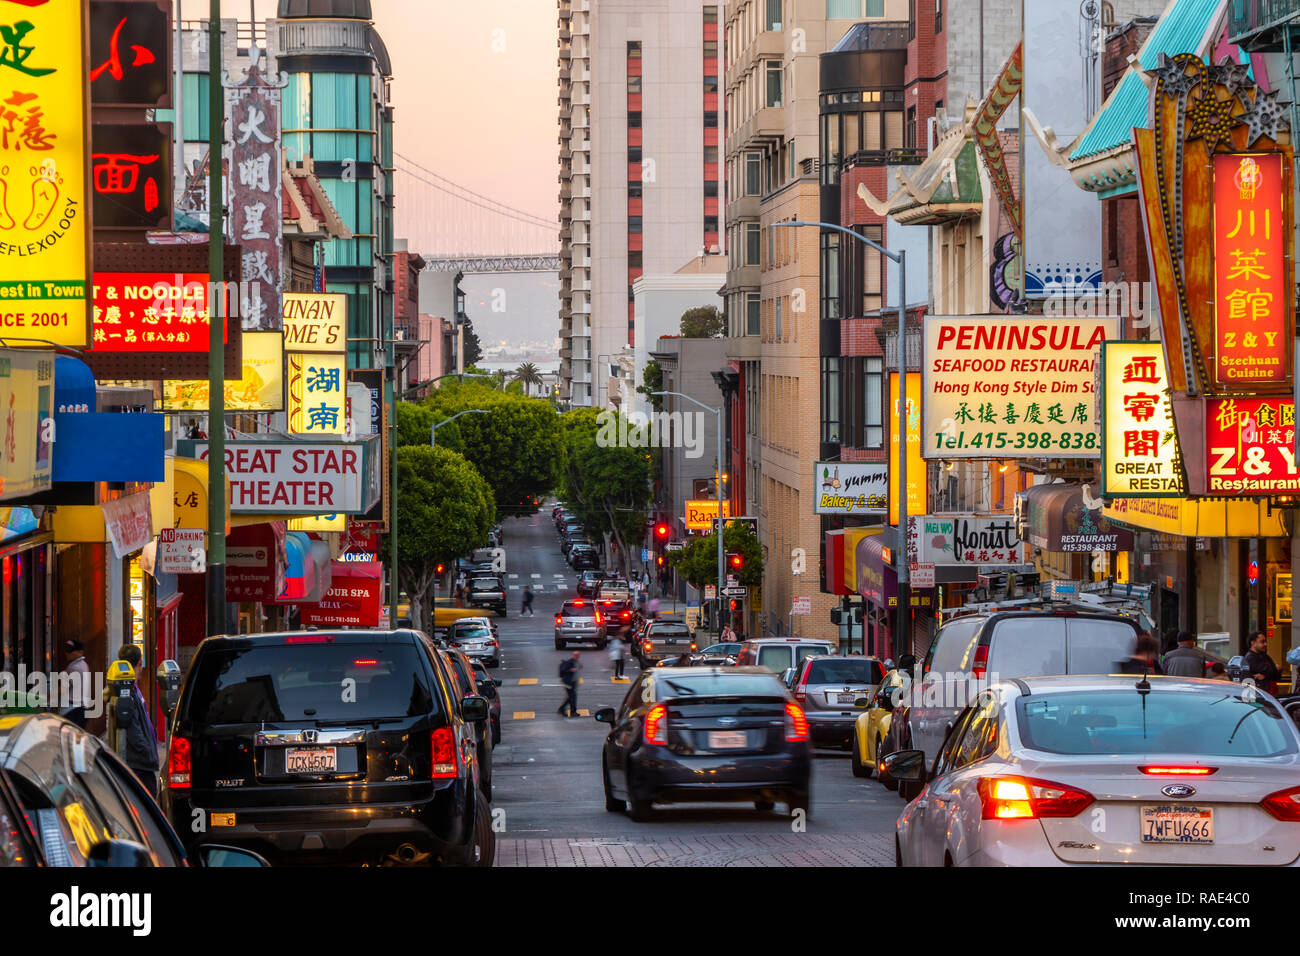 View of neon lights on busy street in Chinatown, San Francisco, California, United States of America, North America Stock Photo